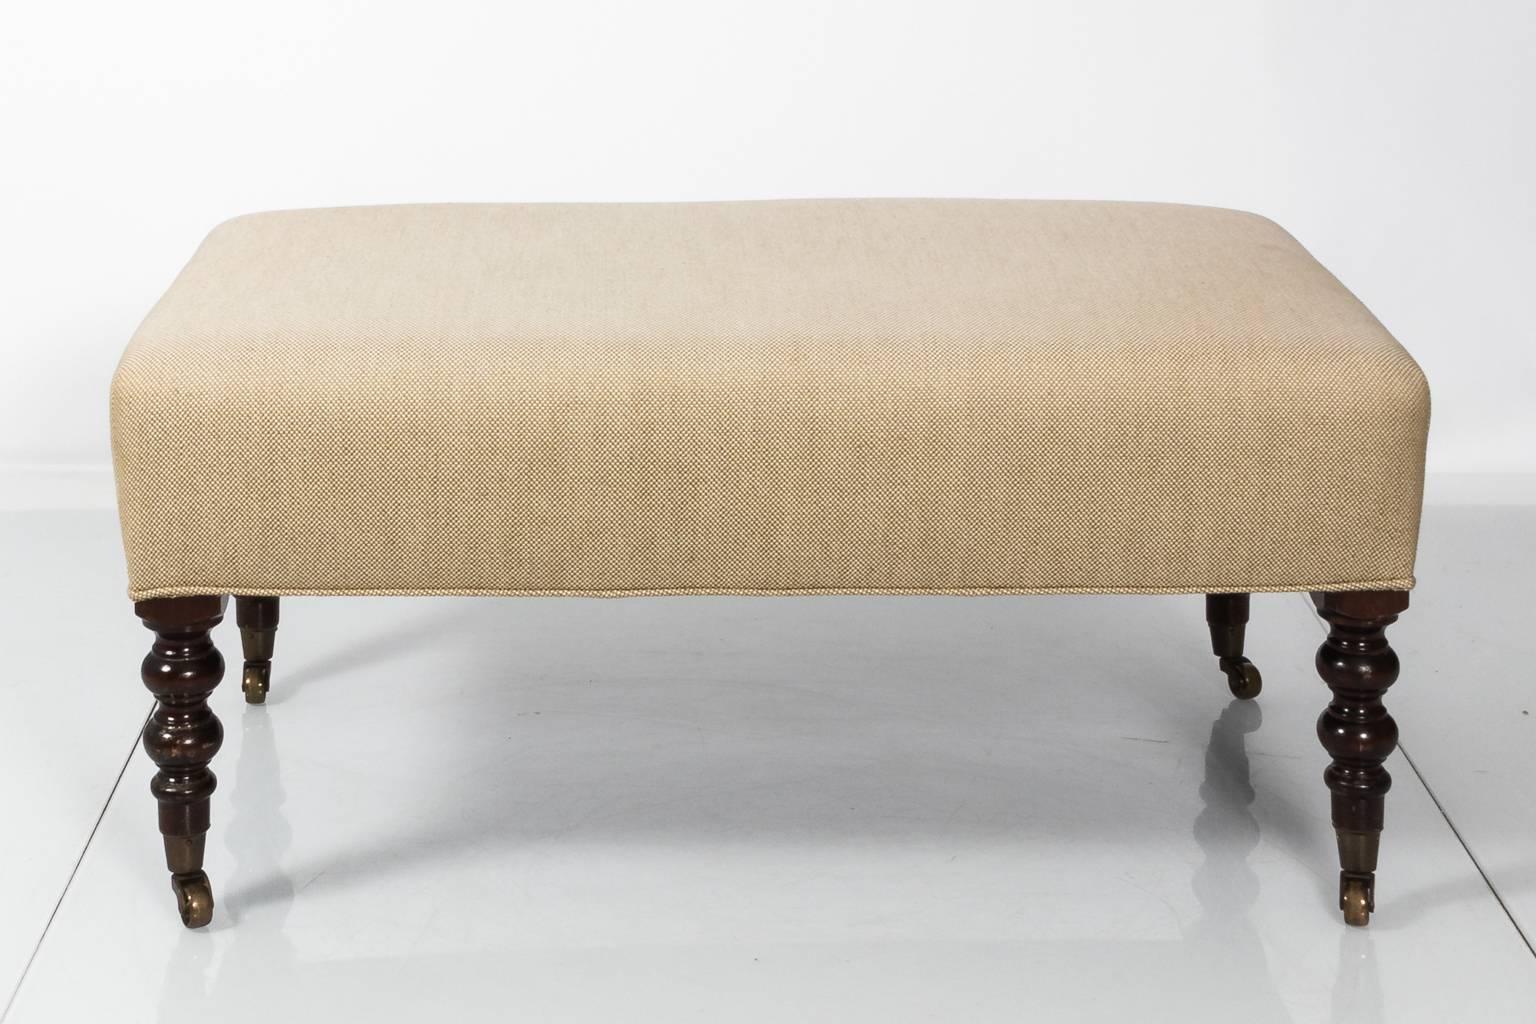 English upholstered bench with ball turned legs on brass castors, circa late 20th century.
   